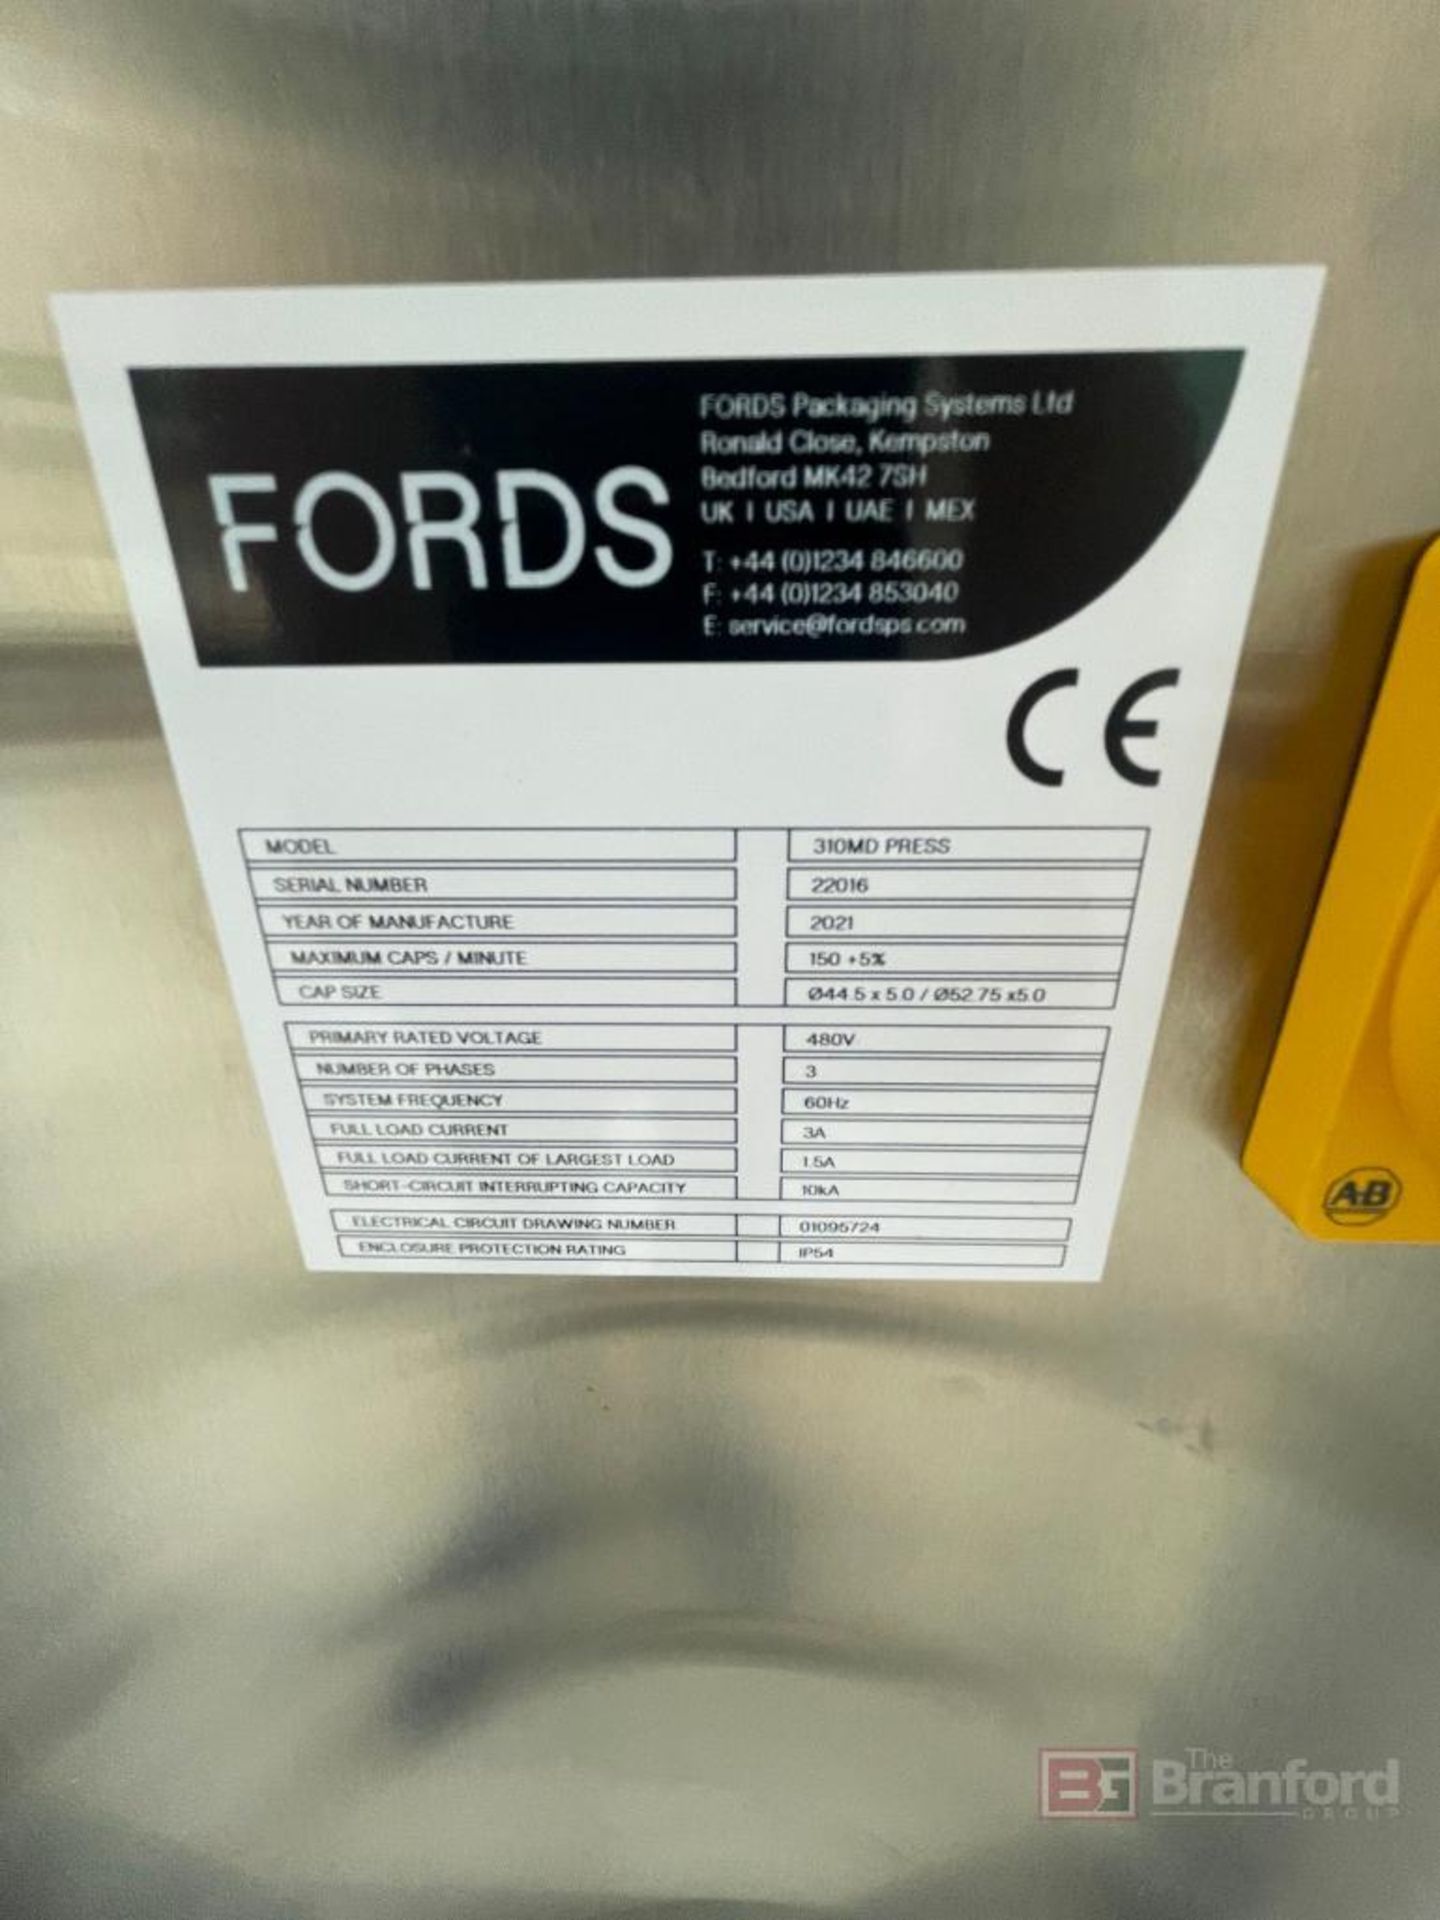 Fords Packaging Systems Model 310MD Foil/ Die Cutter (Year 2021) - Image 4 of 11